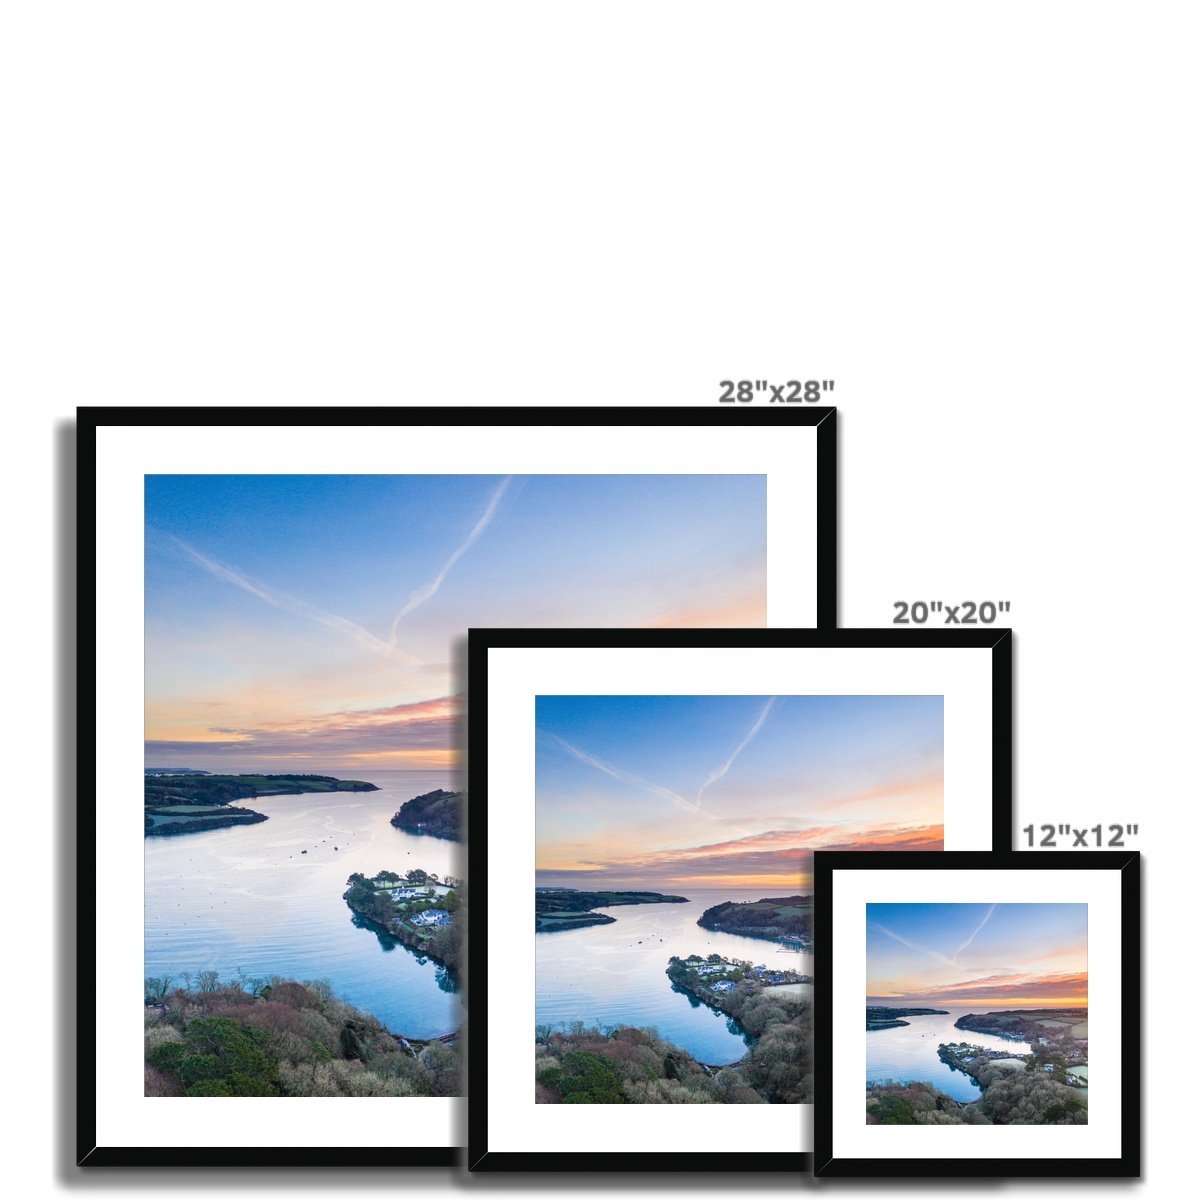 frenchmans creek dawn square wooden frame sizes